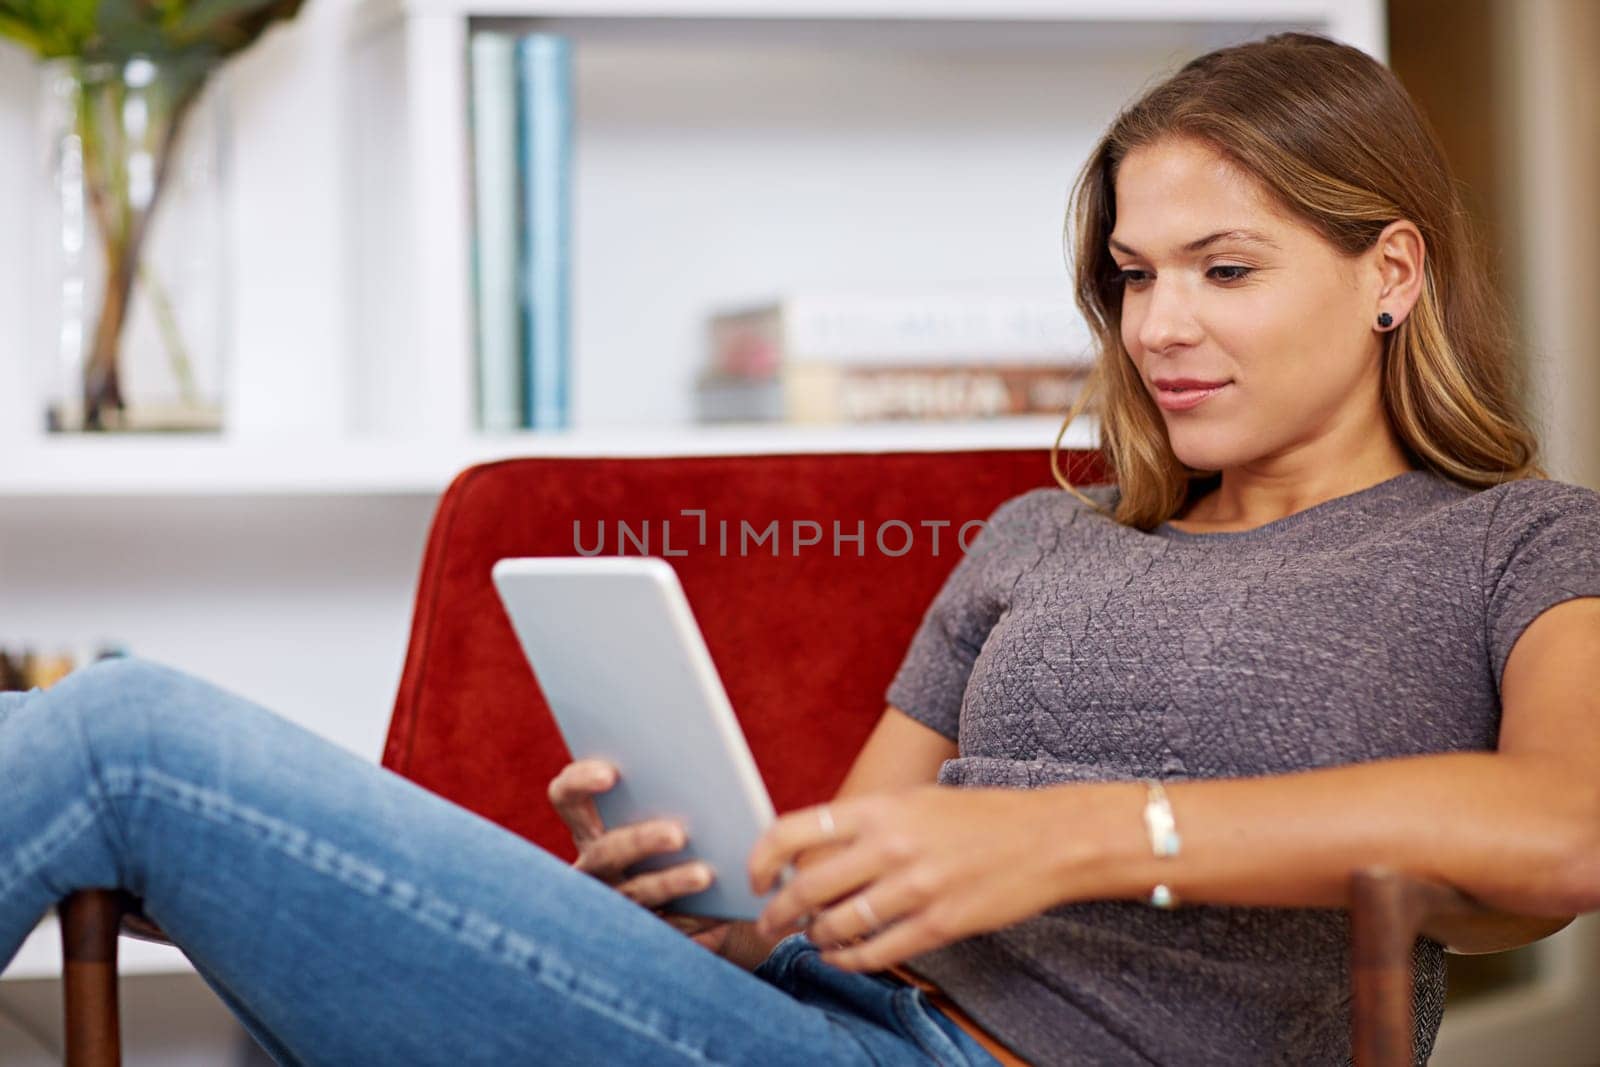 Movie, streaming or woman on tablet in house to relax with internet connection for film, video or research online. Smile, blog and happy girl on social media and technology for subscription in home.